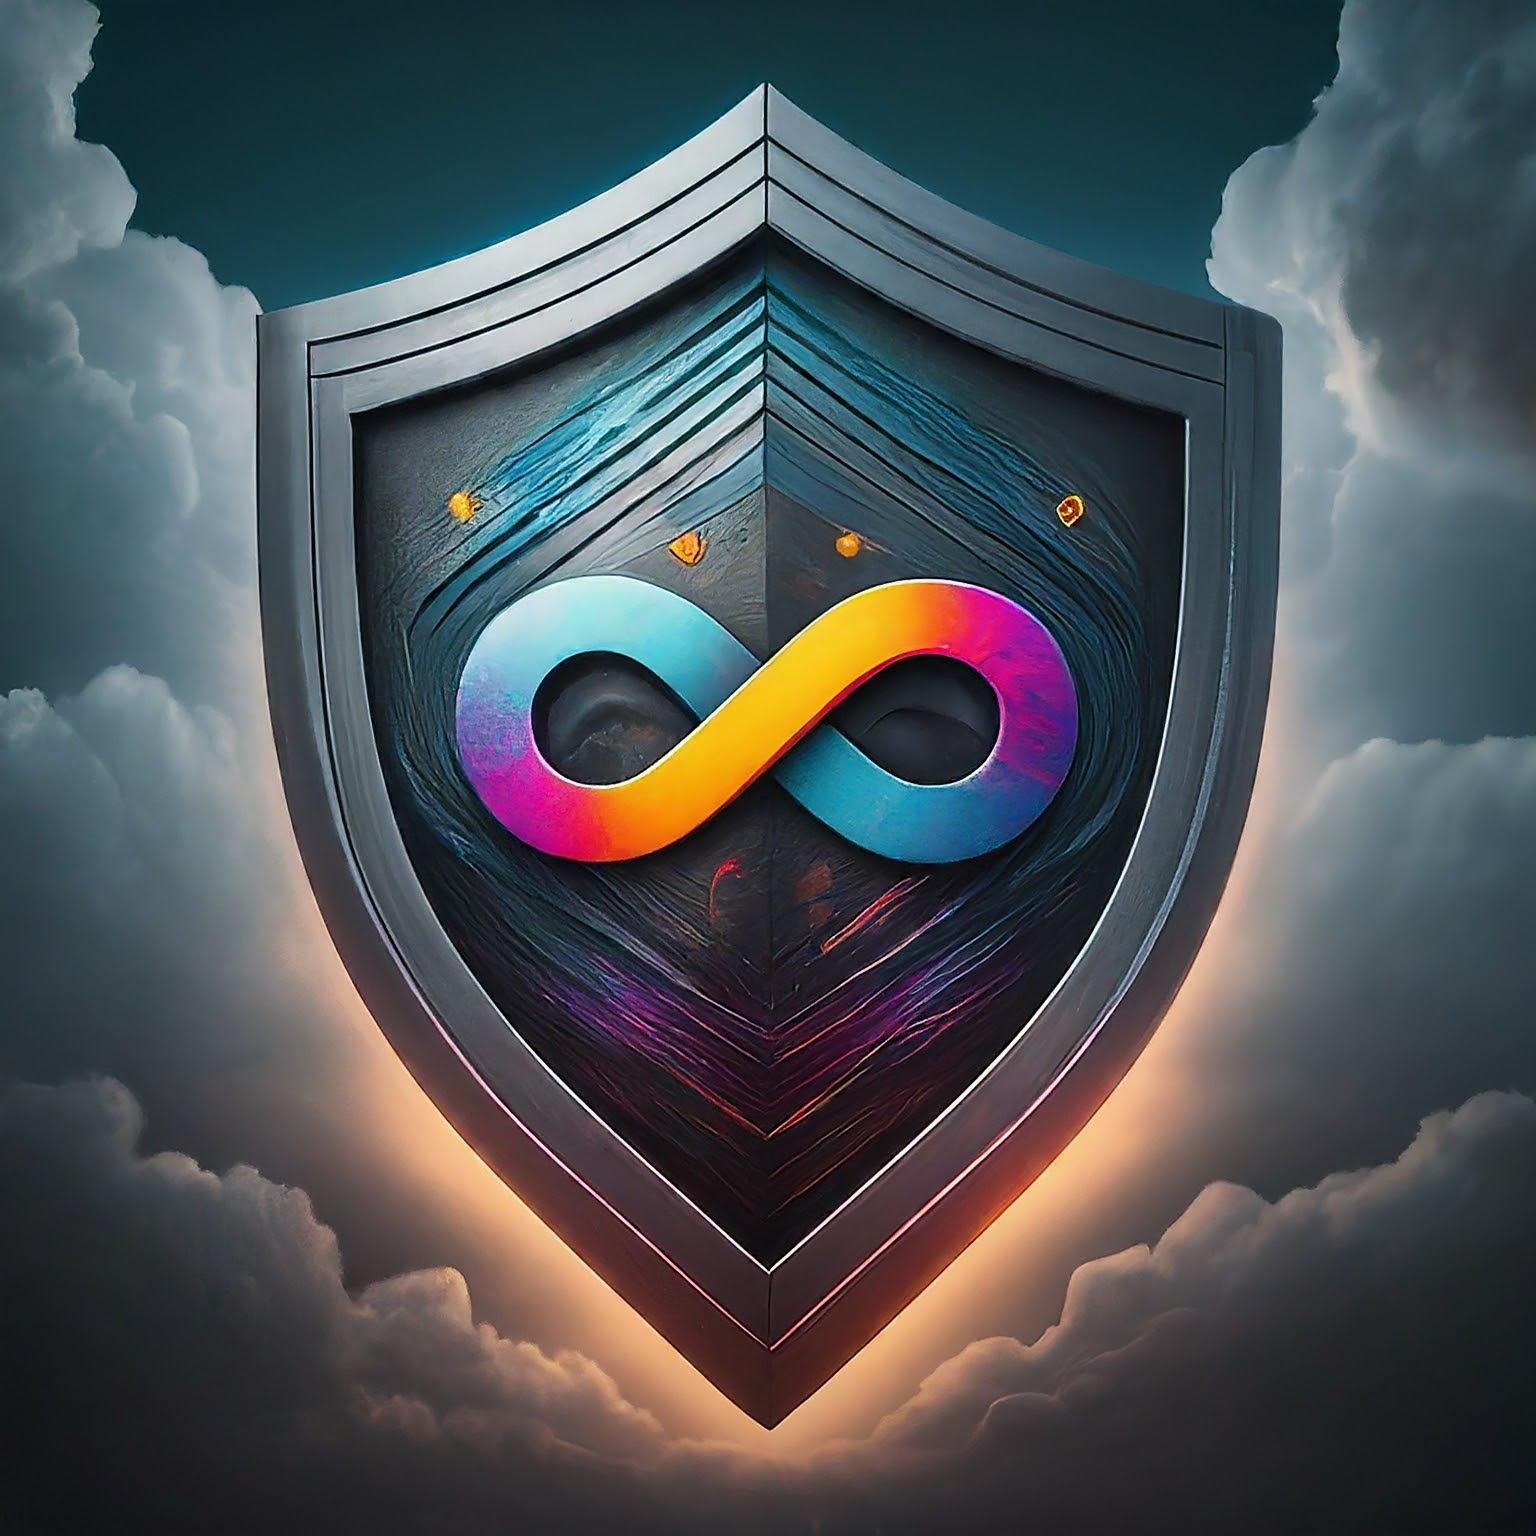 A futuristic DevSecOps symbol. Infinity symbol (continuous development) in secure shield (security) against cloud background (scalability).